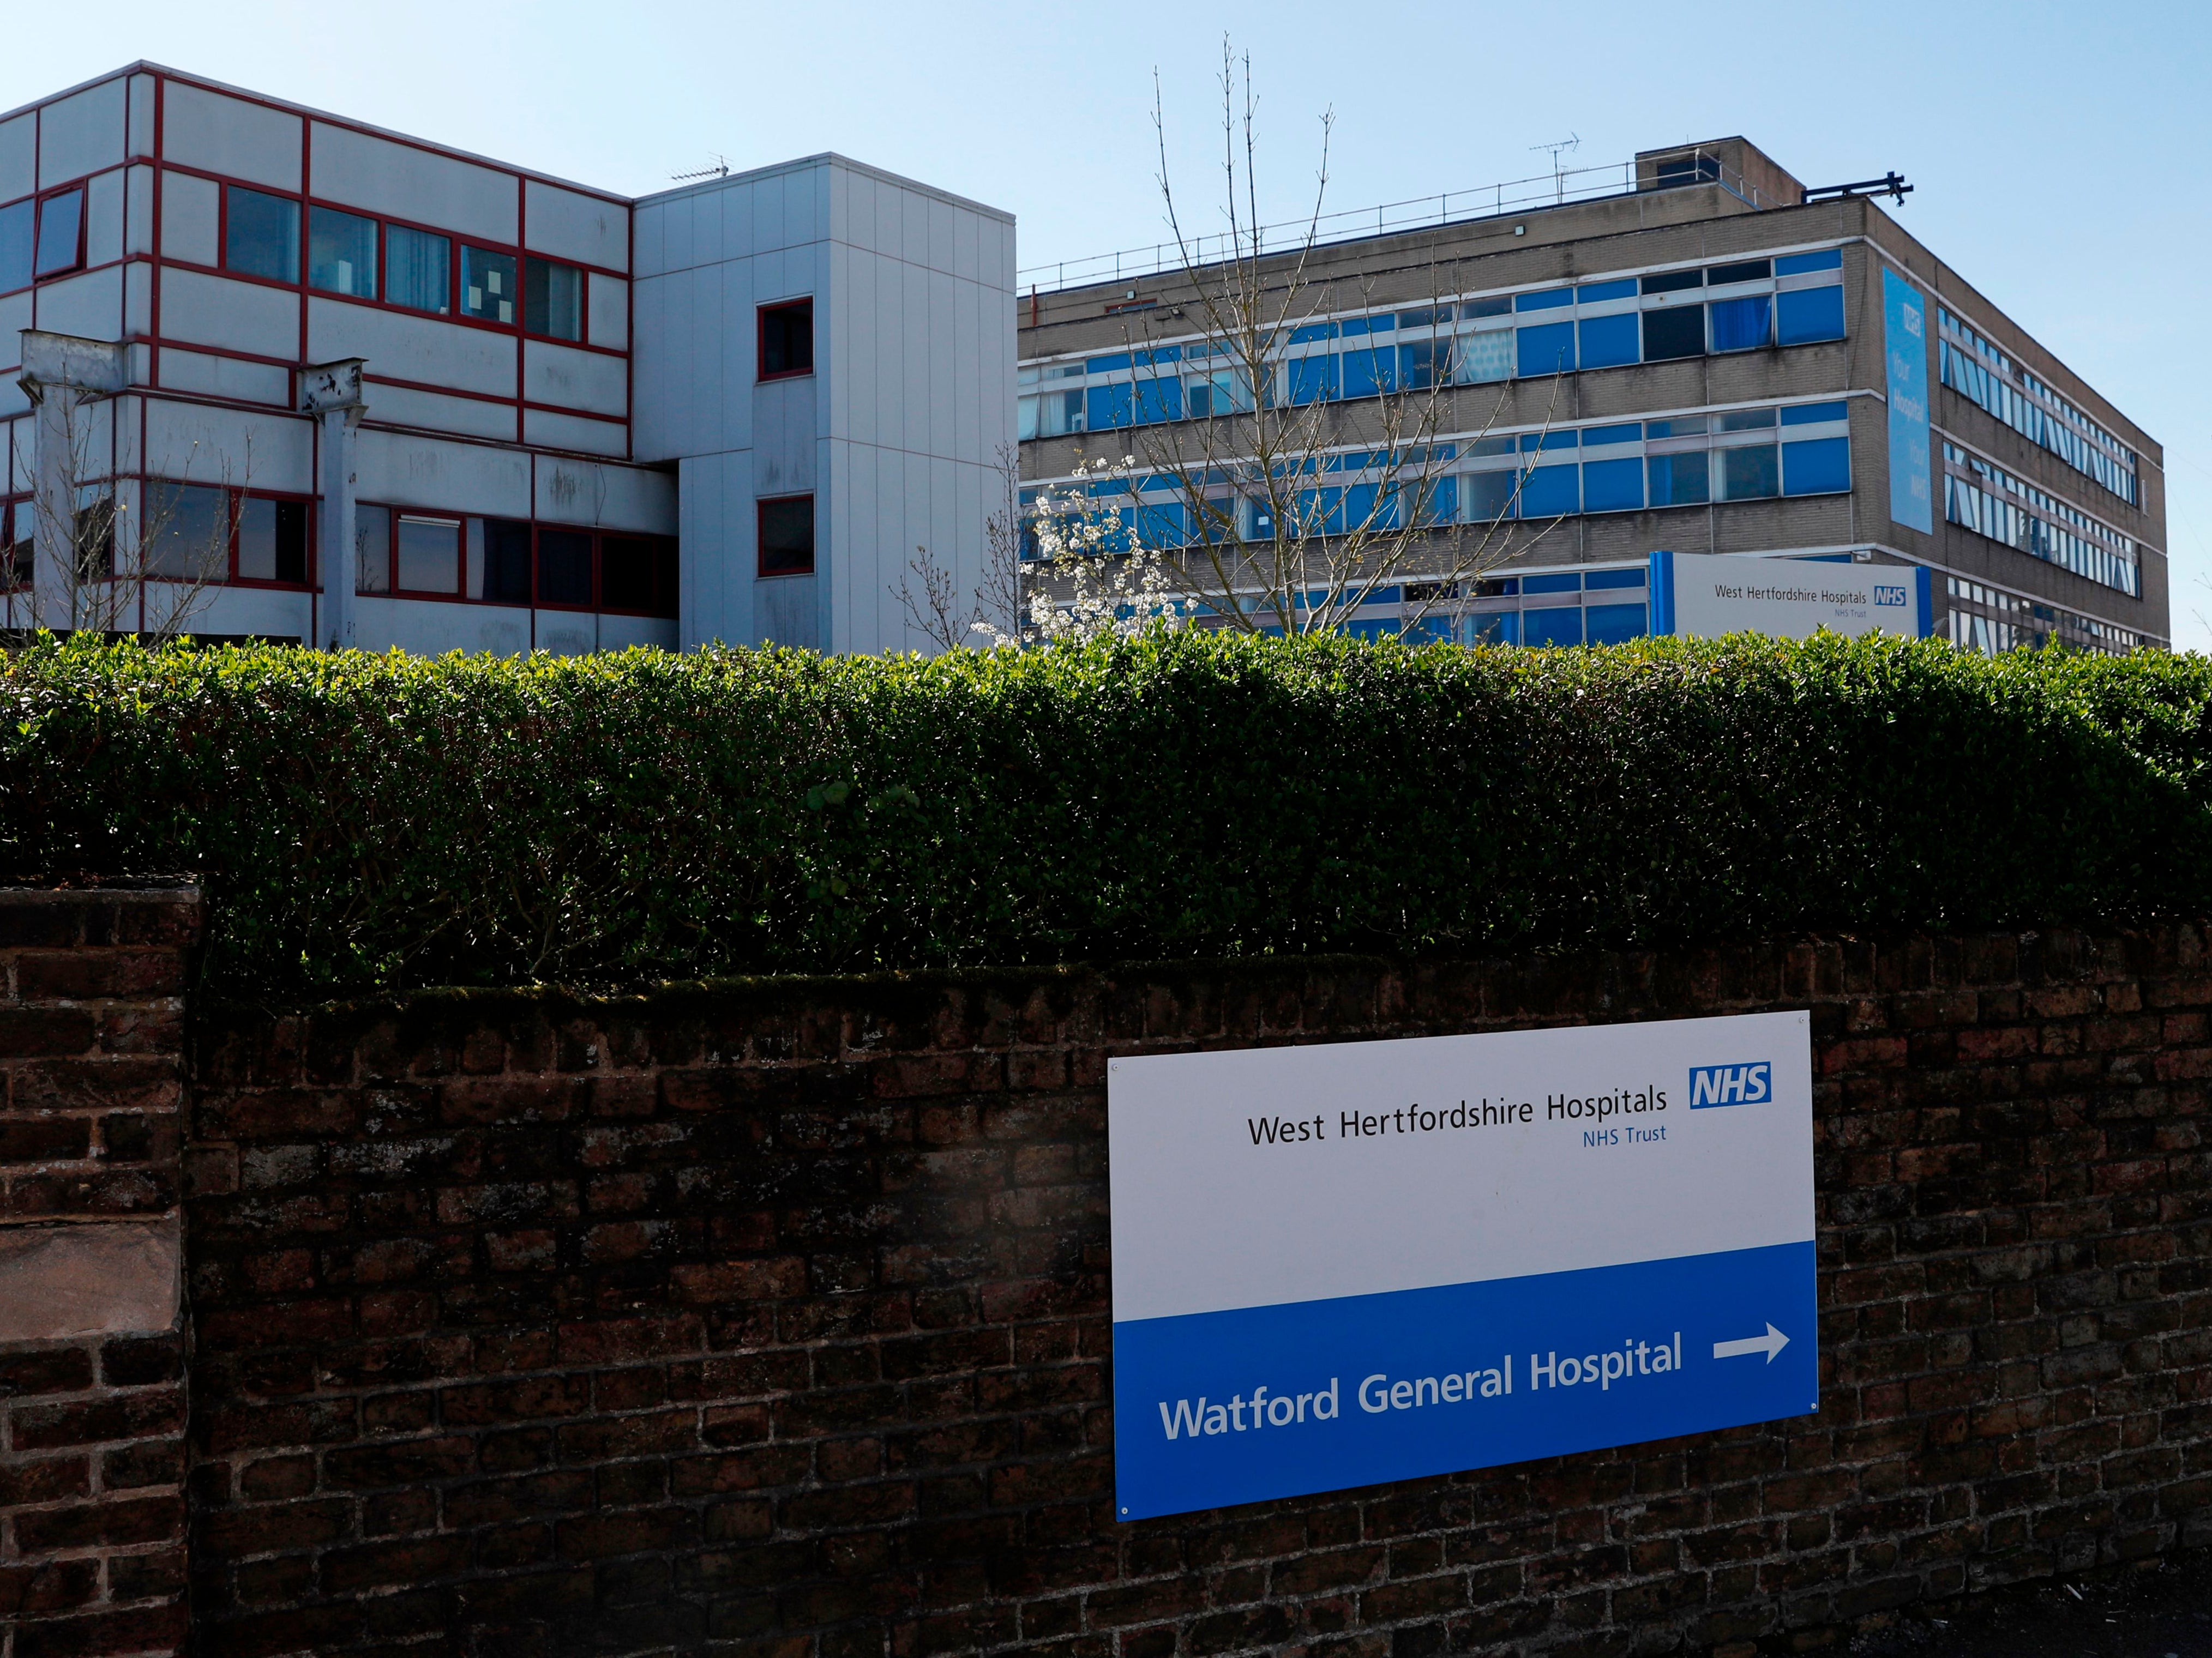 Watford General Hospital is one of three hospitals run by West Herts